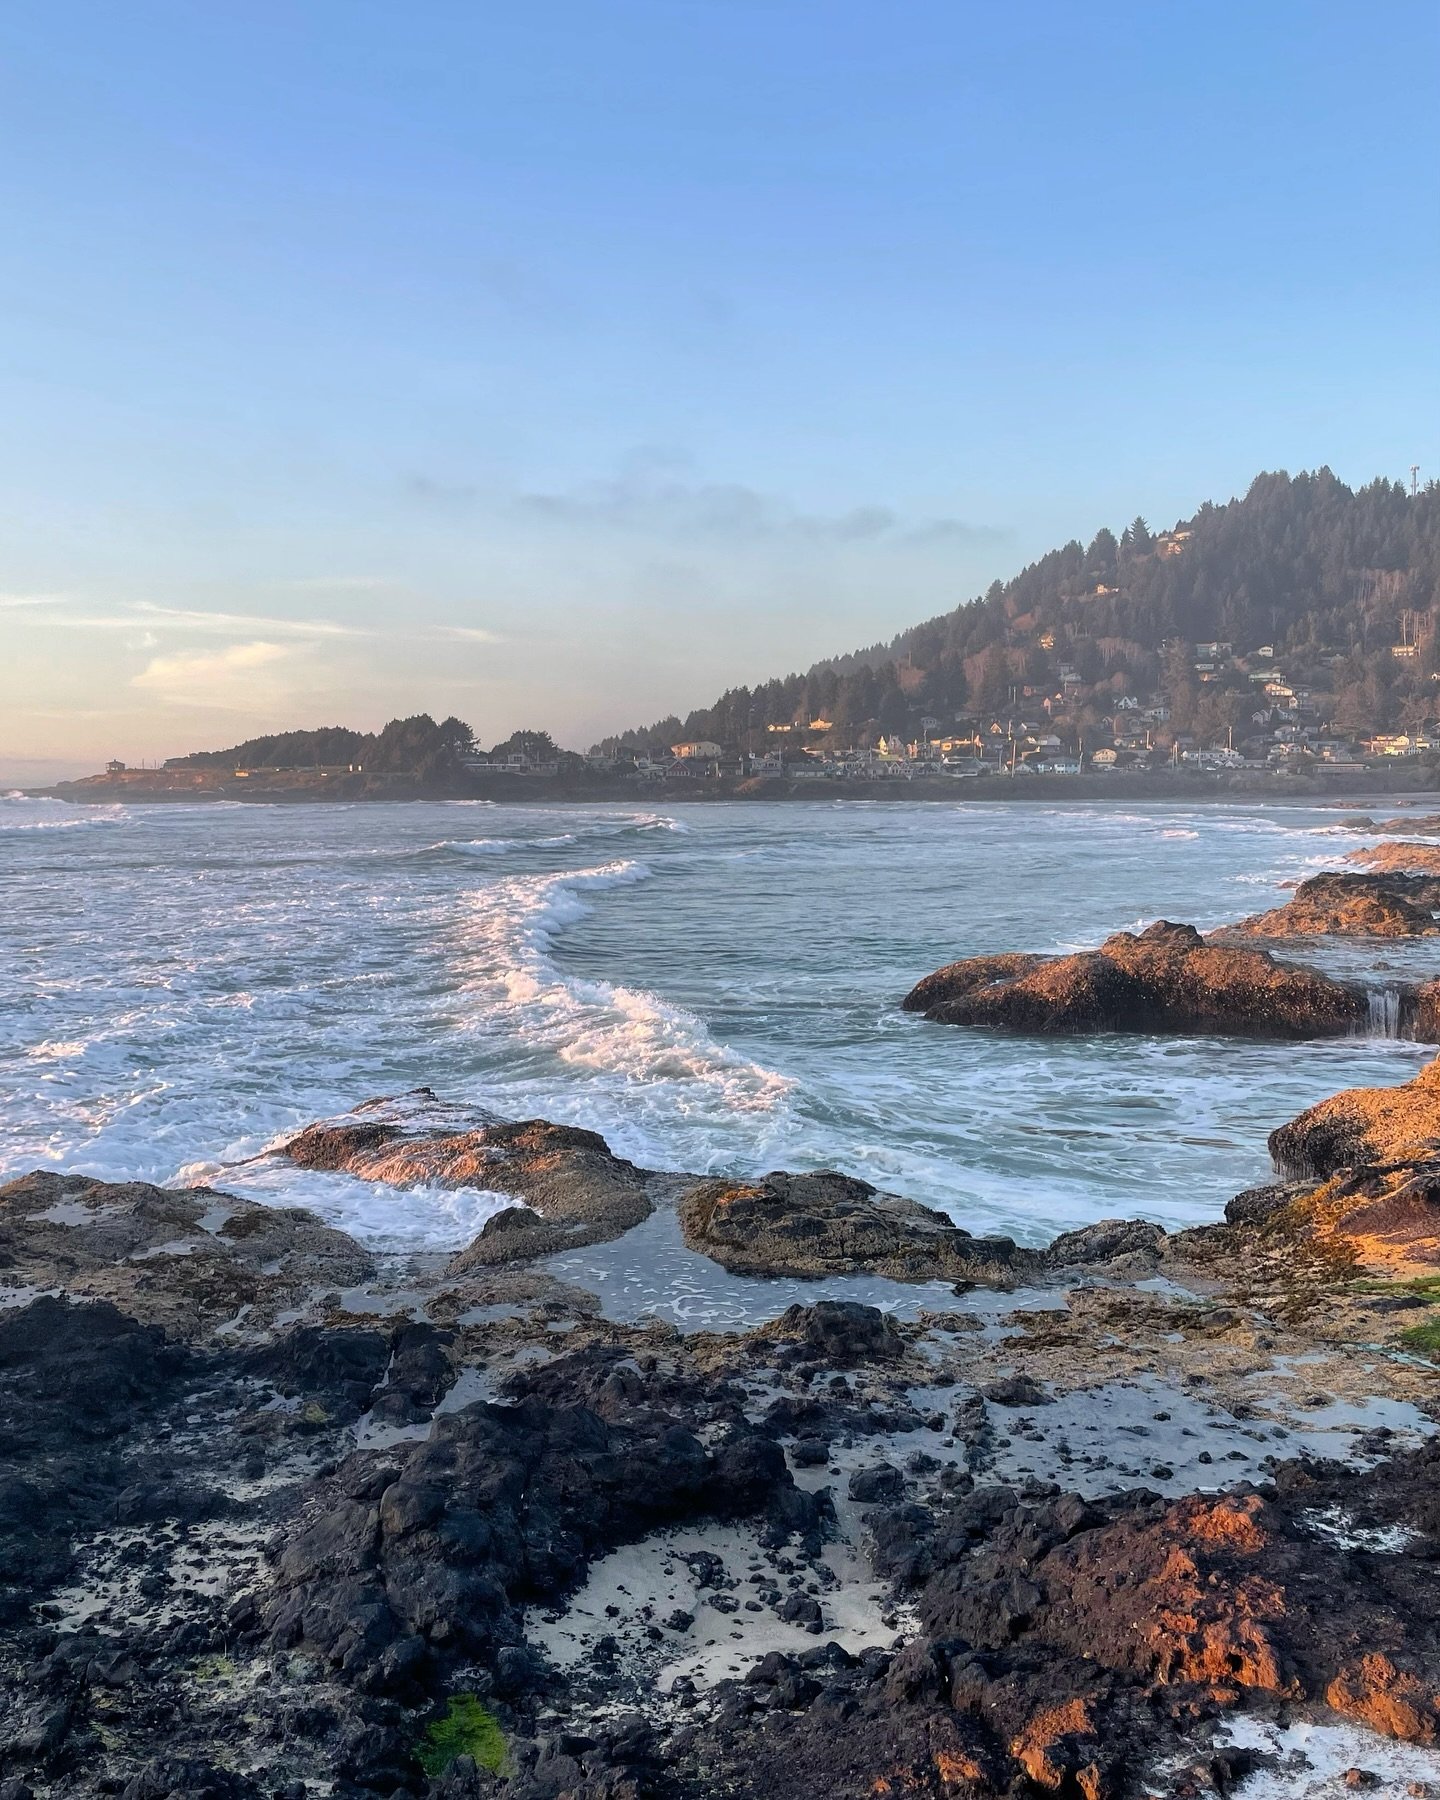 🌊 Ah, that Friday feeling hitting just like a wave crashing on the shore! 🌊

 Dive into the weekend vibes in Yachats and let the soothing sound of the ocean carry you away. 🏖️ 

#yachatsoregon #oregoncoast